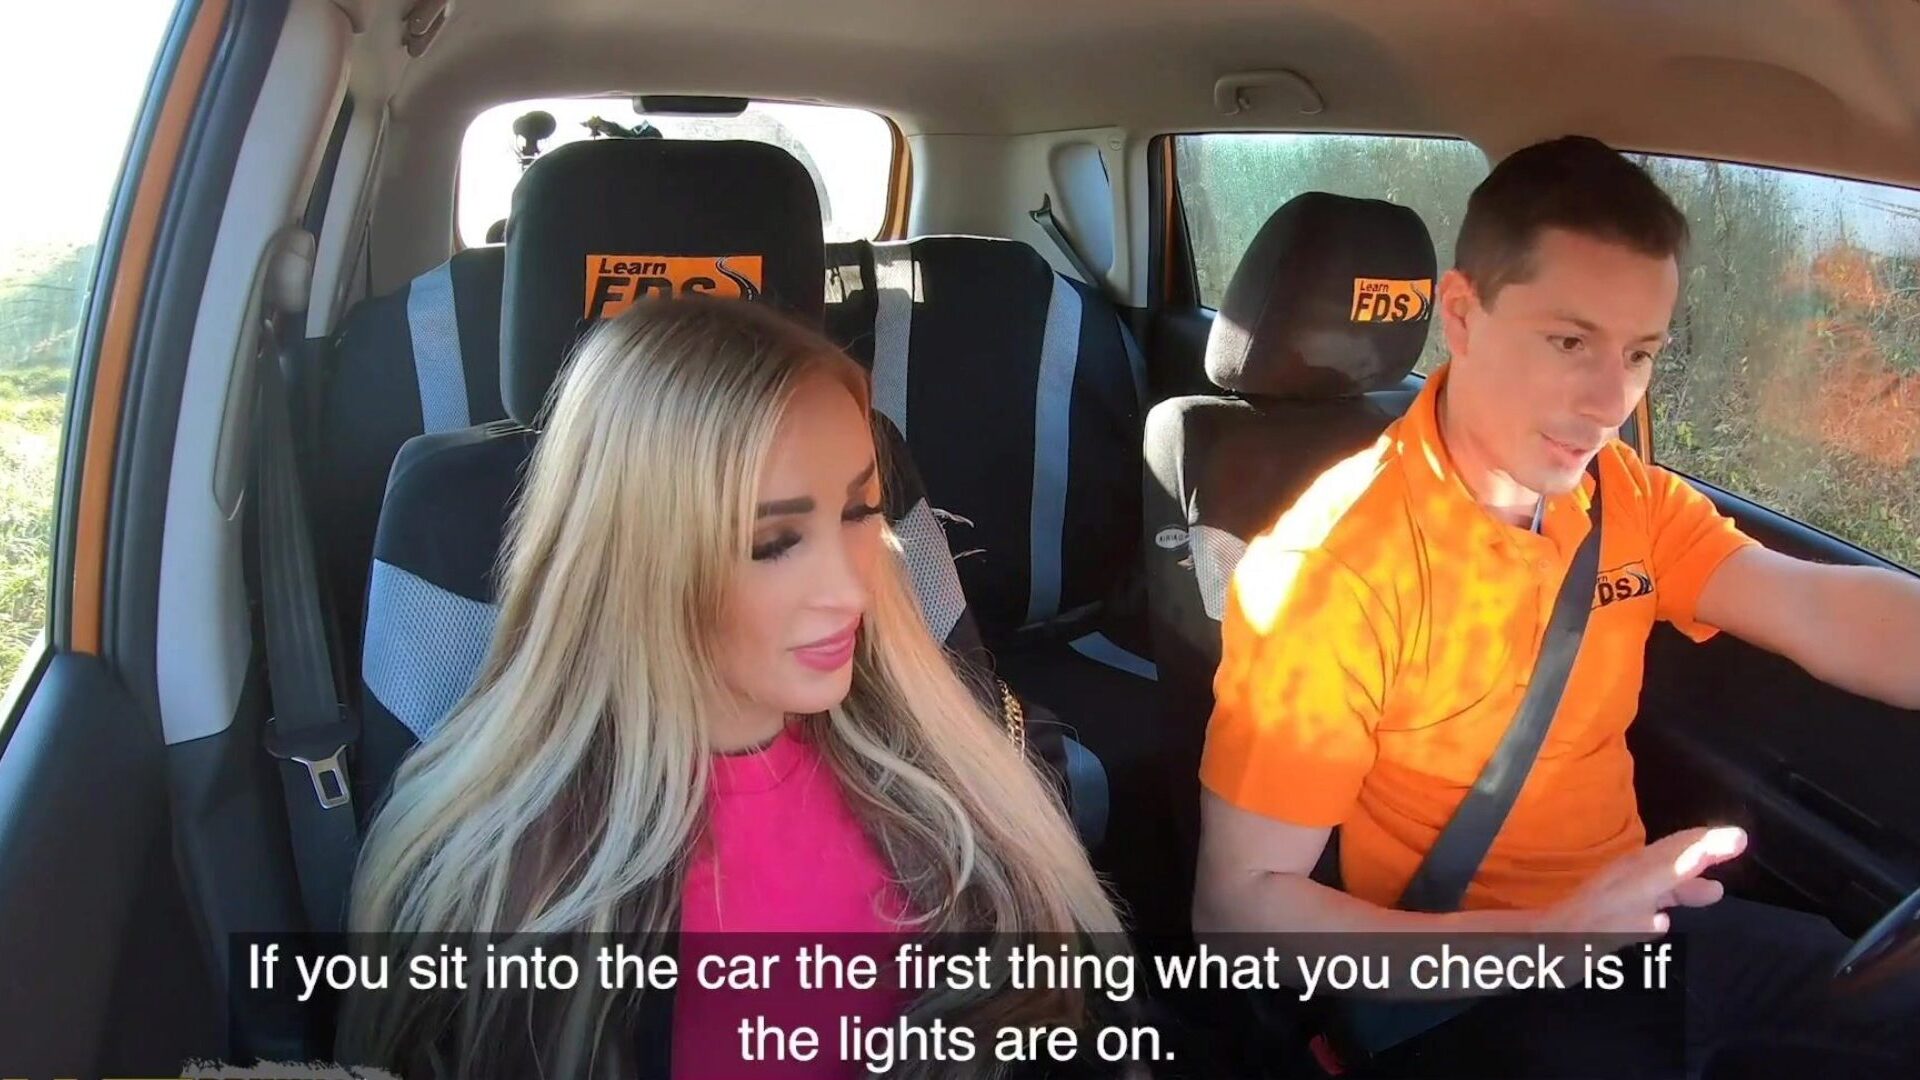 FakeDrivingSchool Hot Blonde Student With Great Tits Fucked Aug 10th 2021